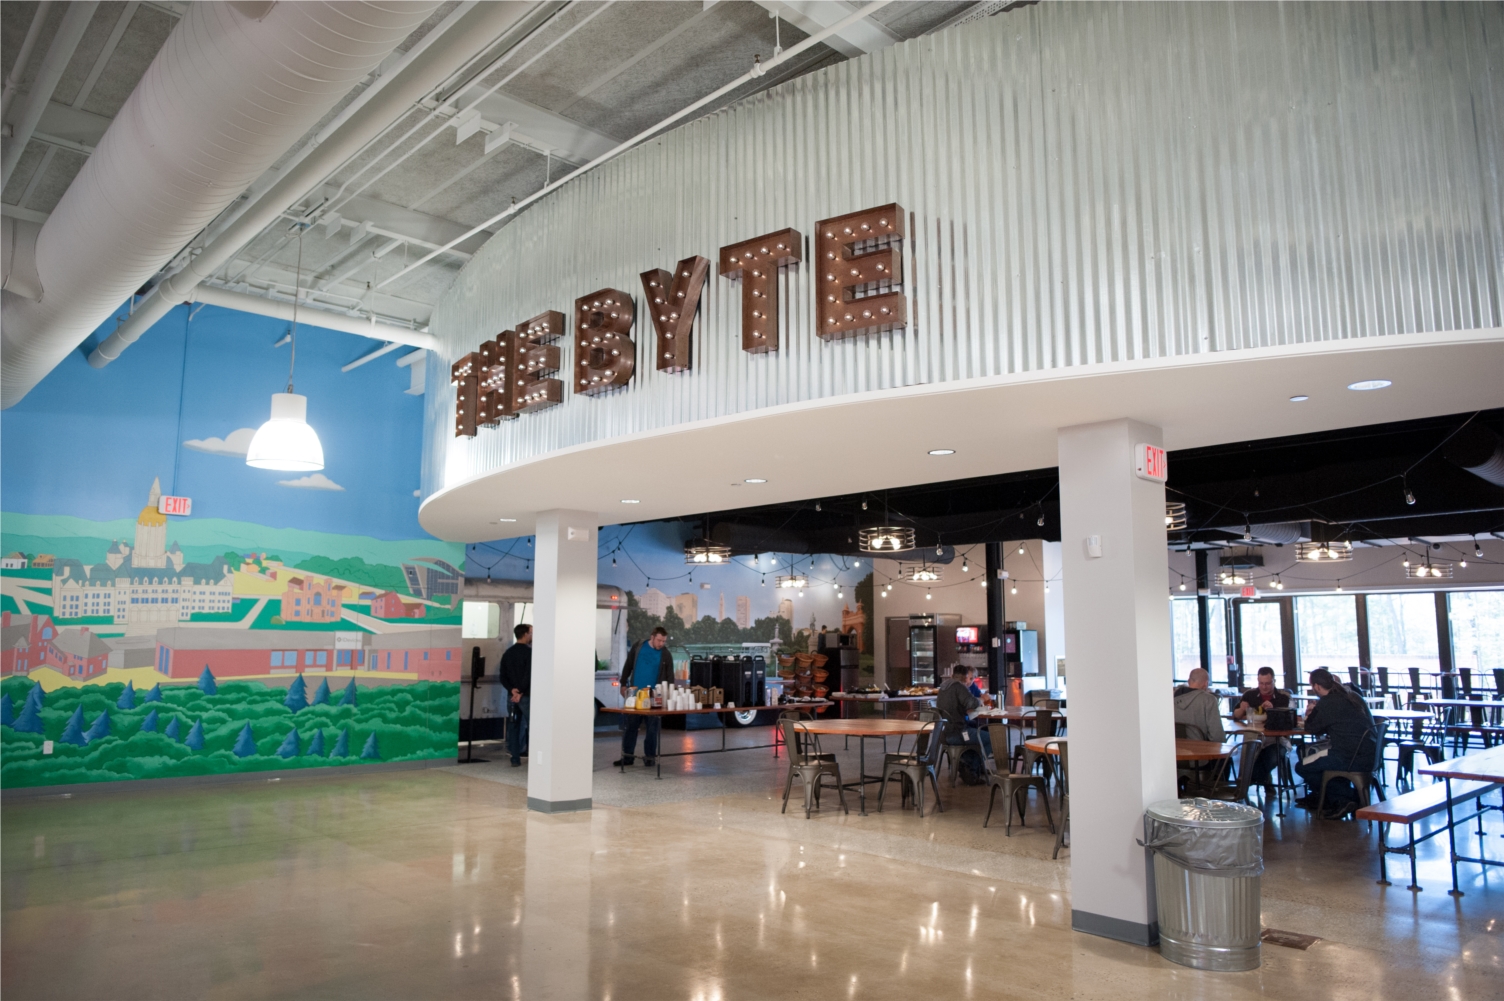 The Byte is iDevices cafe, where employees can order breakfast, lunch, and dinner from the company's two personal chefs. Meals are subsidized, making it easy and affordable for employees to bring dinner home to their families. 